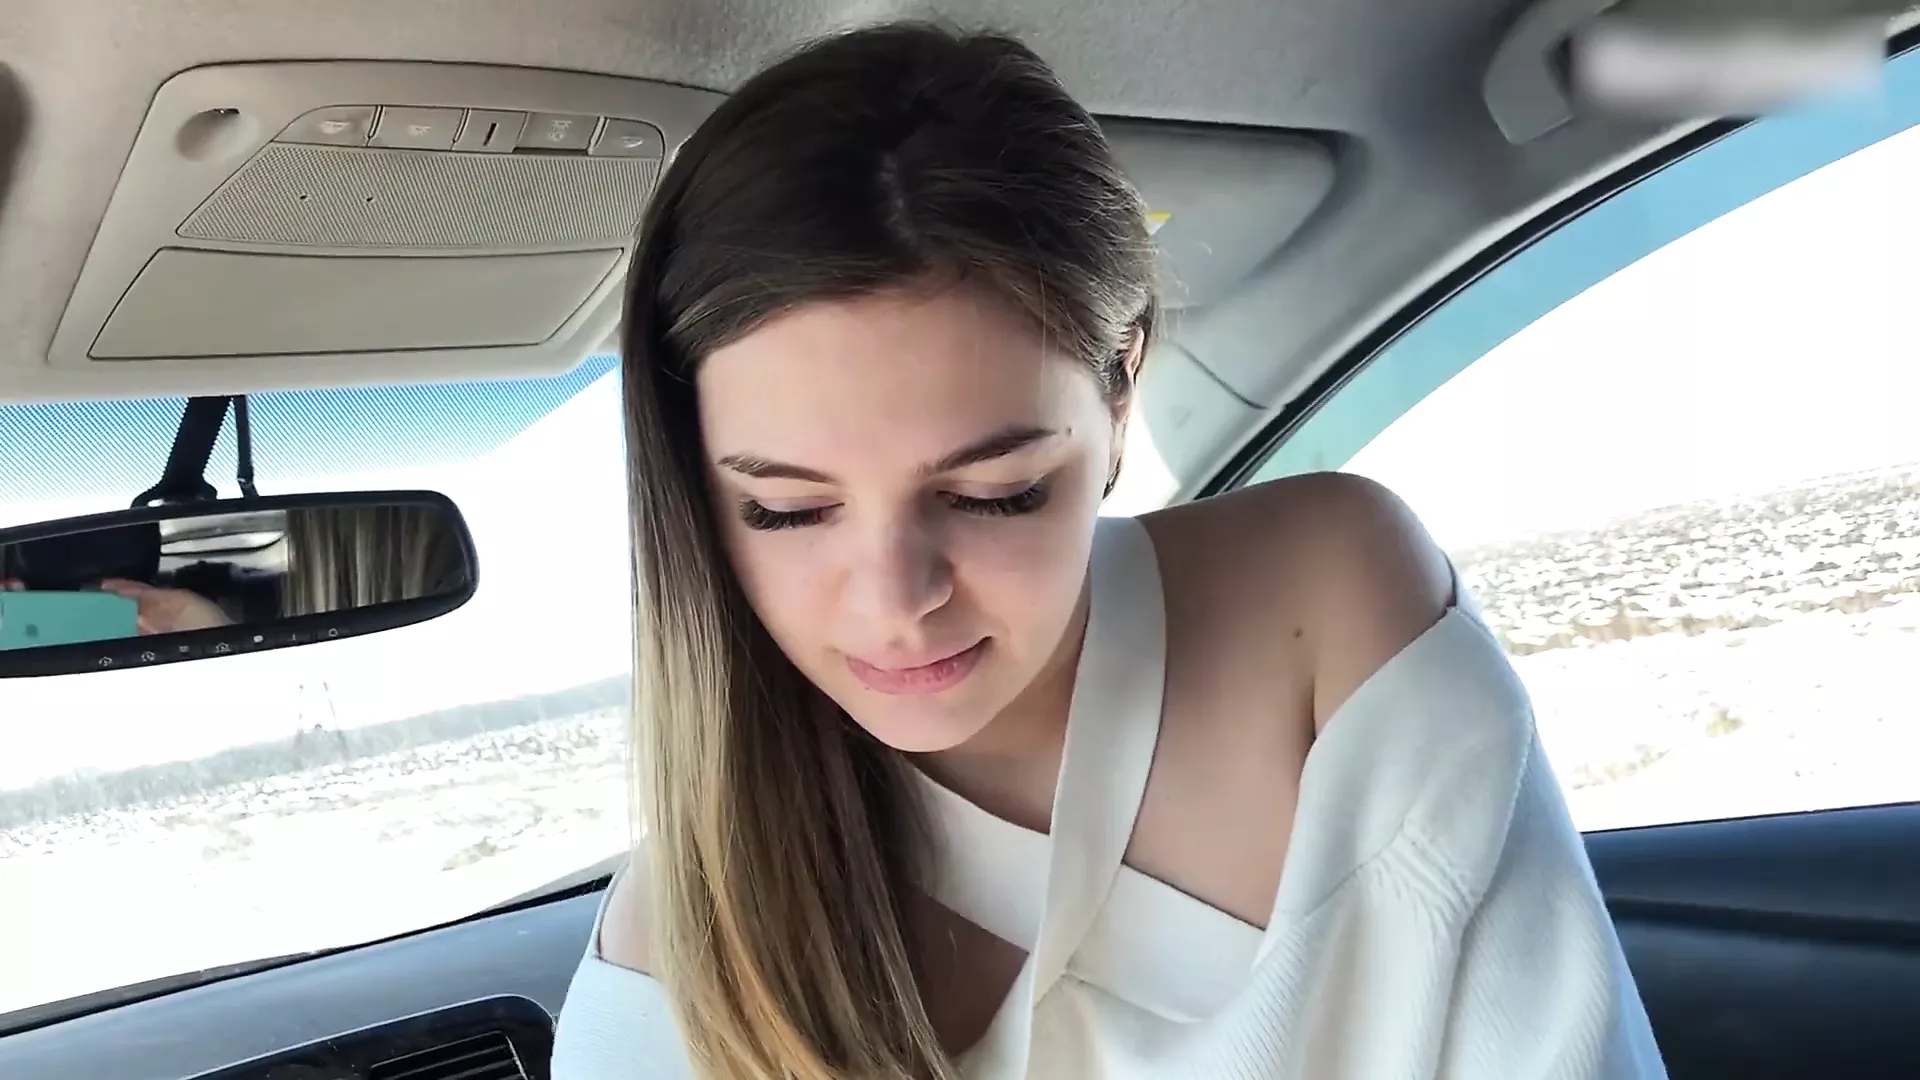 Fucked a stranger girl in the middle of a field in a car | xHamster